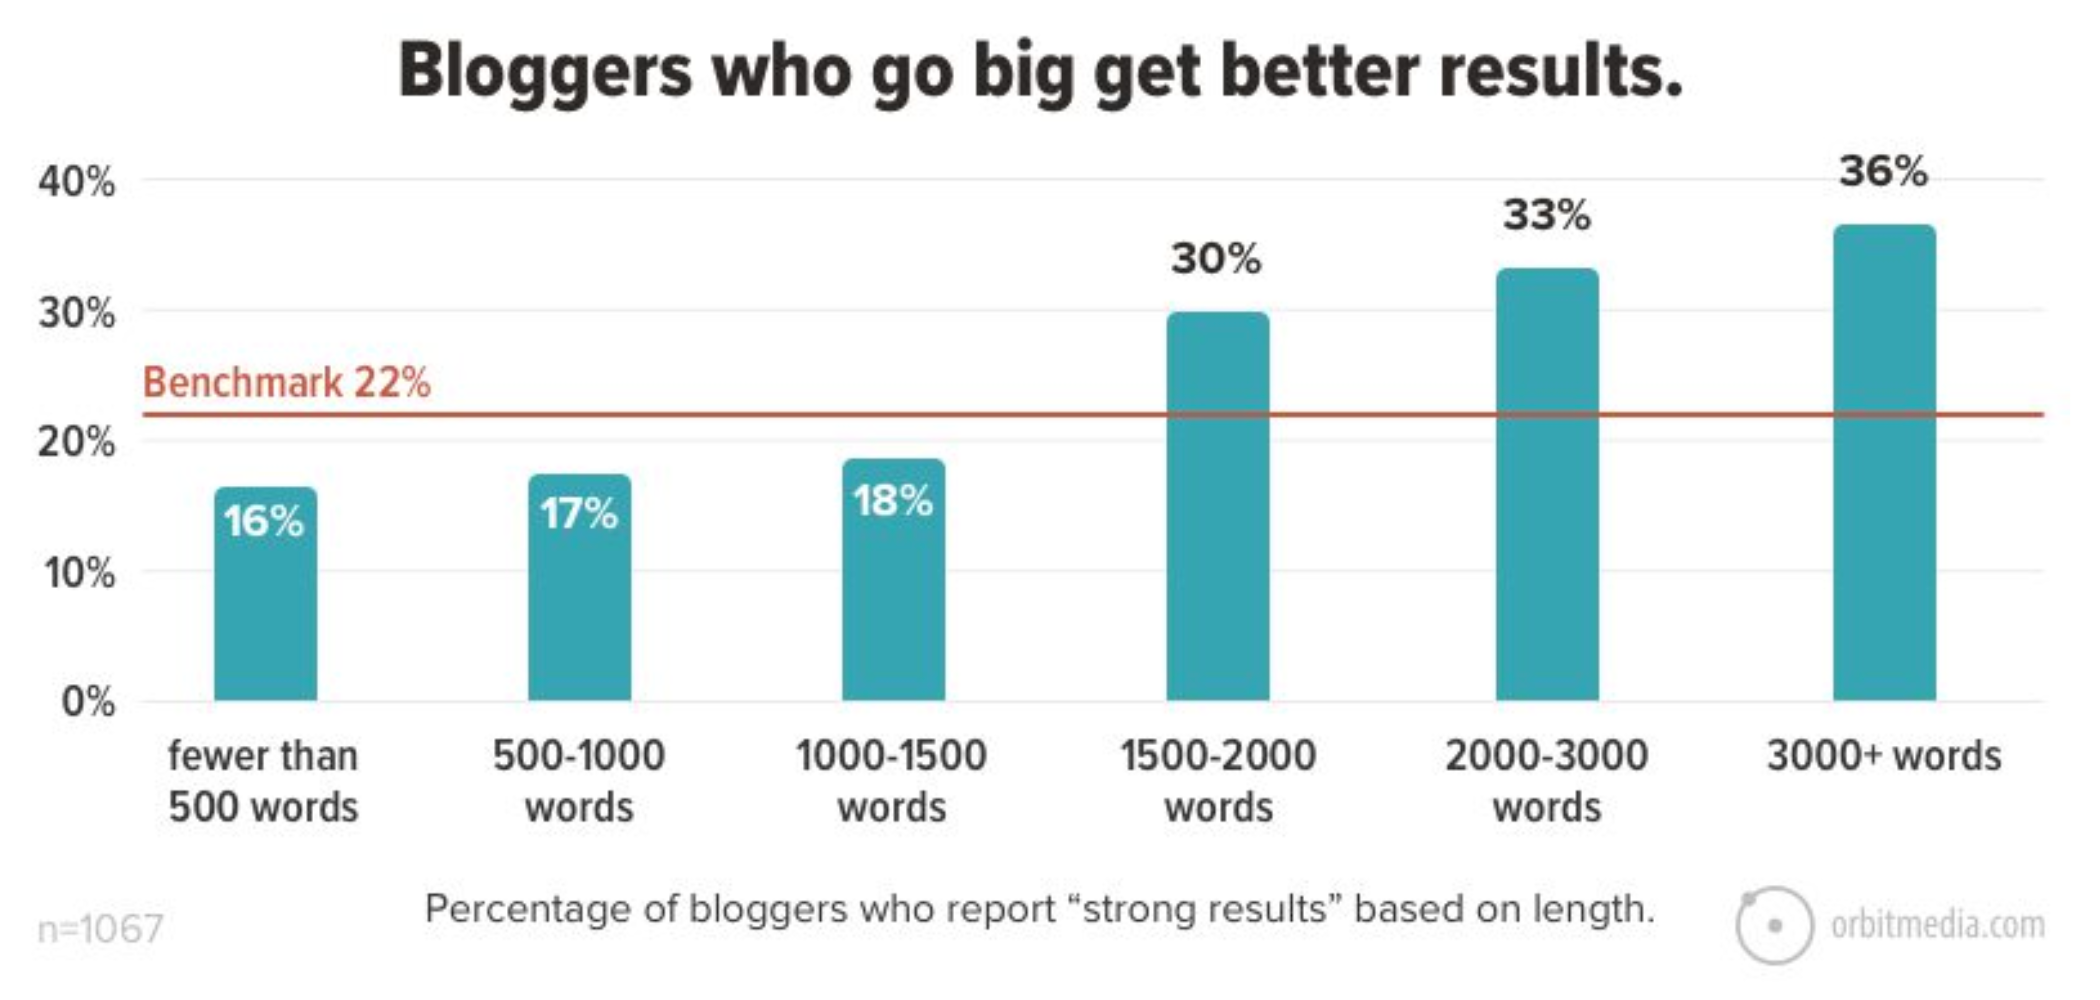 Bloggers Who Go Big Get Better Results